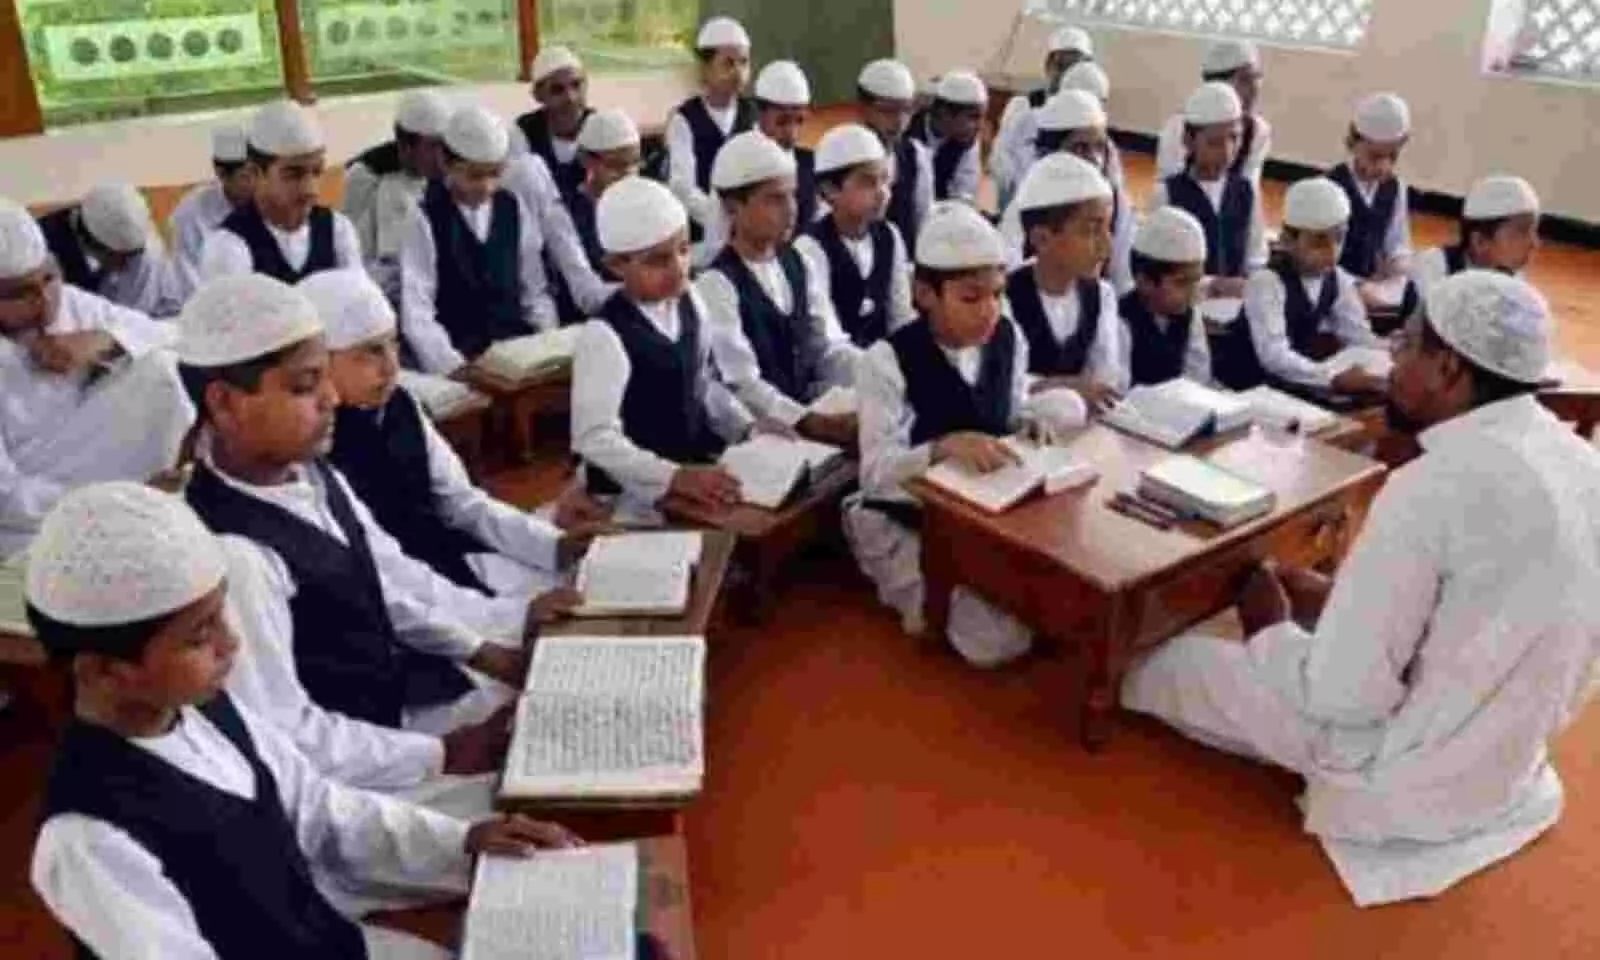 Central Government plans to commission study on modernisation of madrasas